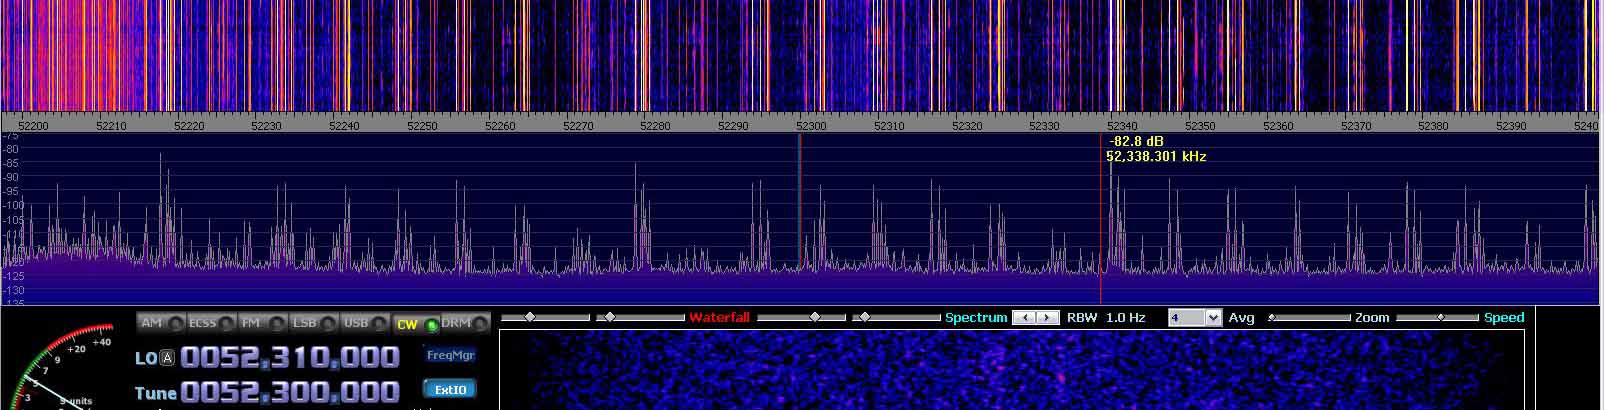 2014-07-04 52.300 MHz +- 100 kHz - Strong Es - 4-el dipole array with ends to St P - (c) OH7HJ.JPG